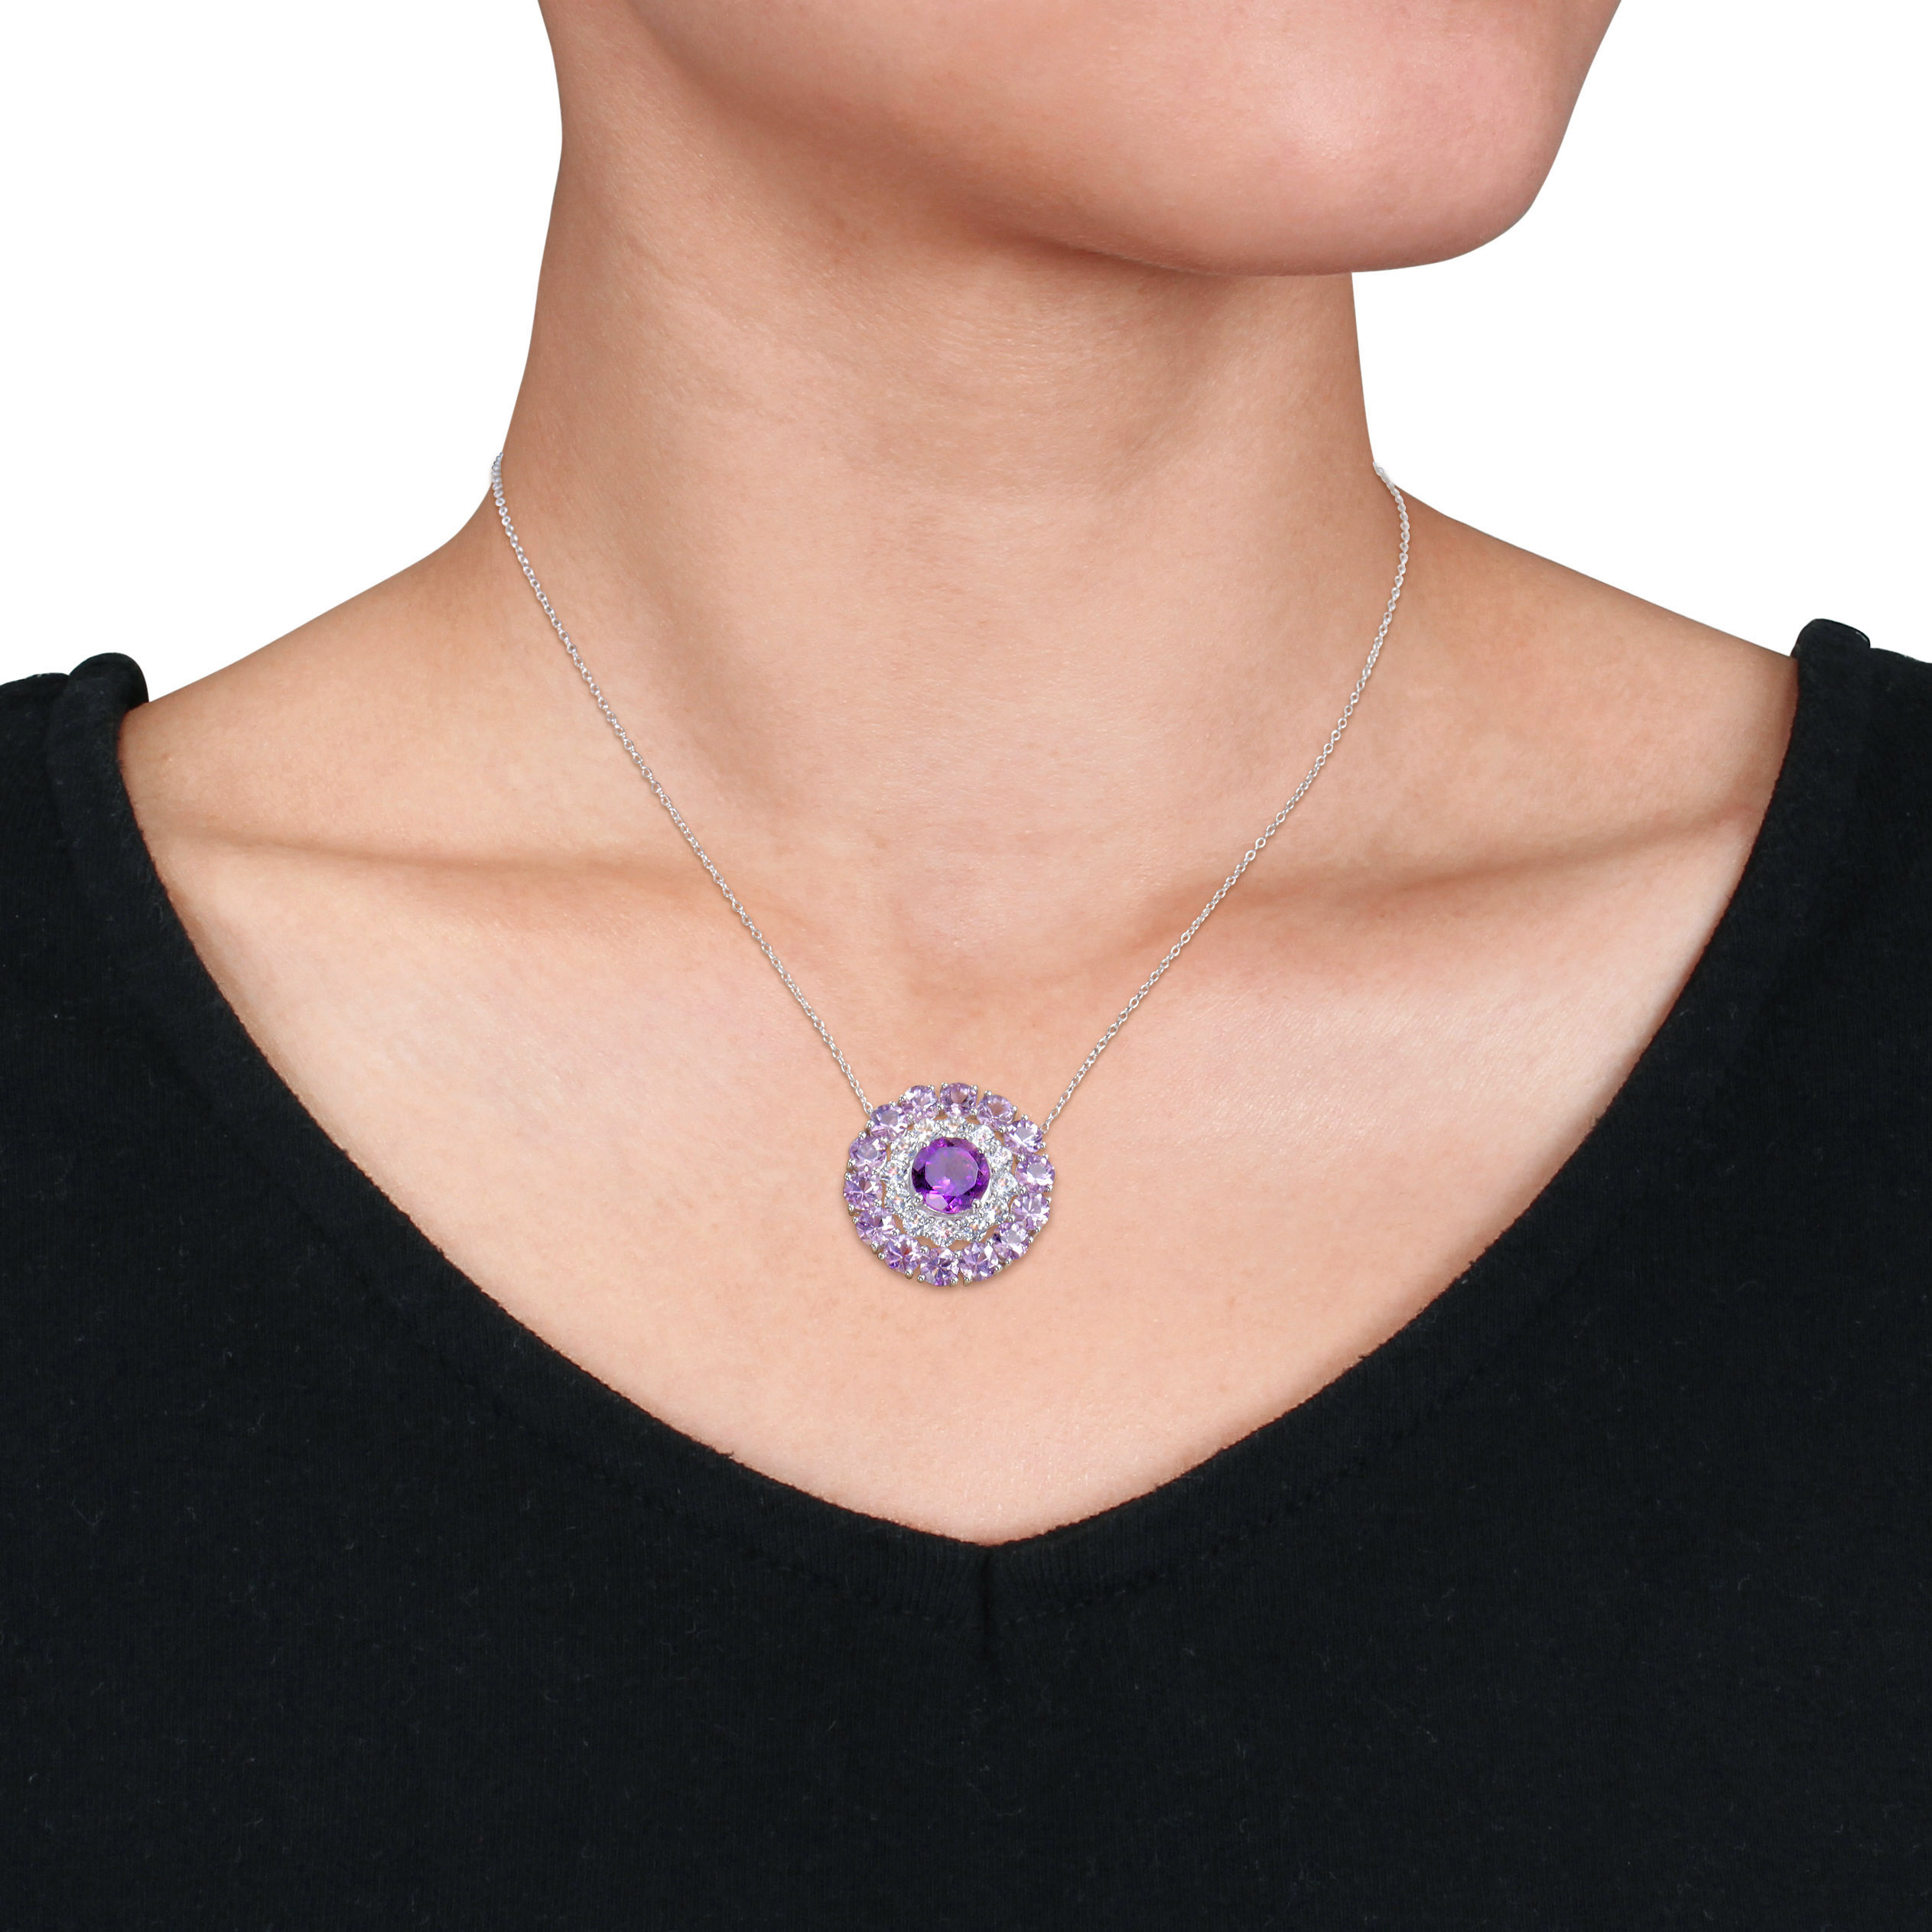 11 1/4 CT TGW Amethyst, African Amethyst and White Topaz Double Halo Circle Pendant with Chain in Sterling Silver - 18 in.